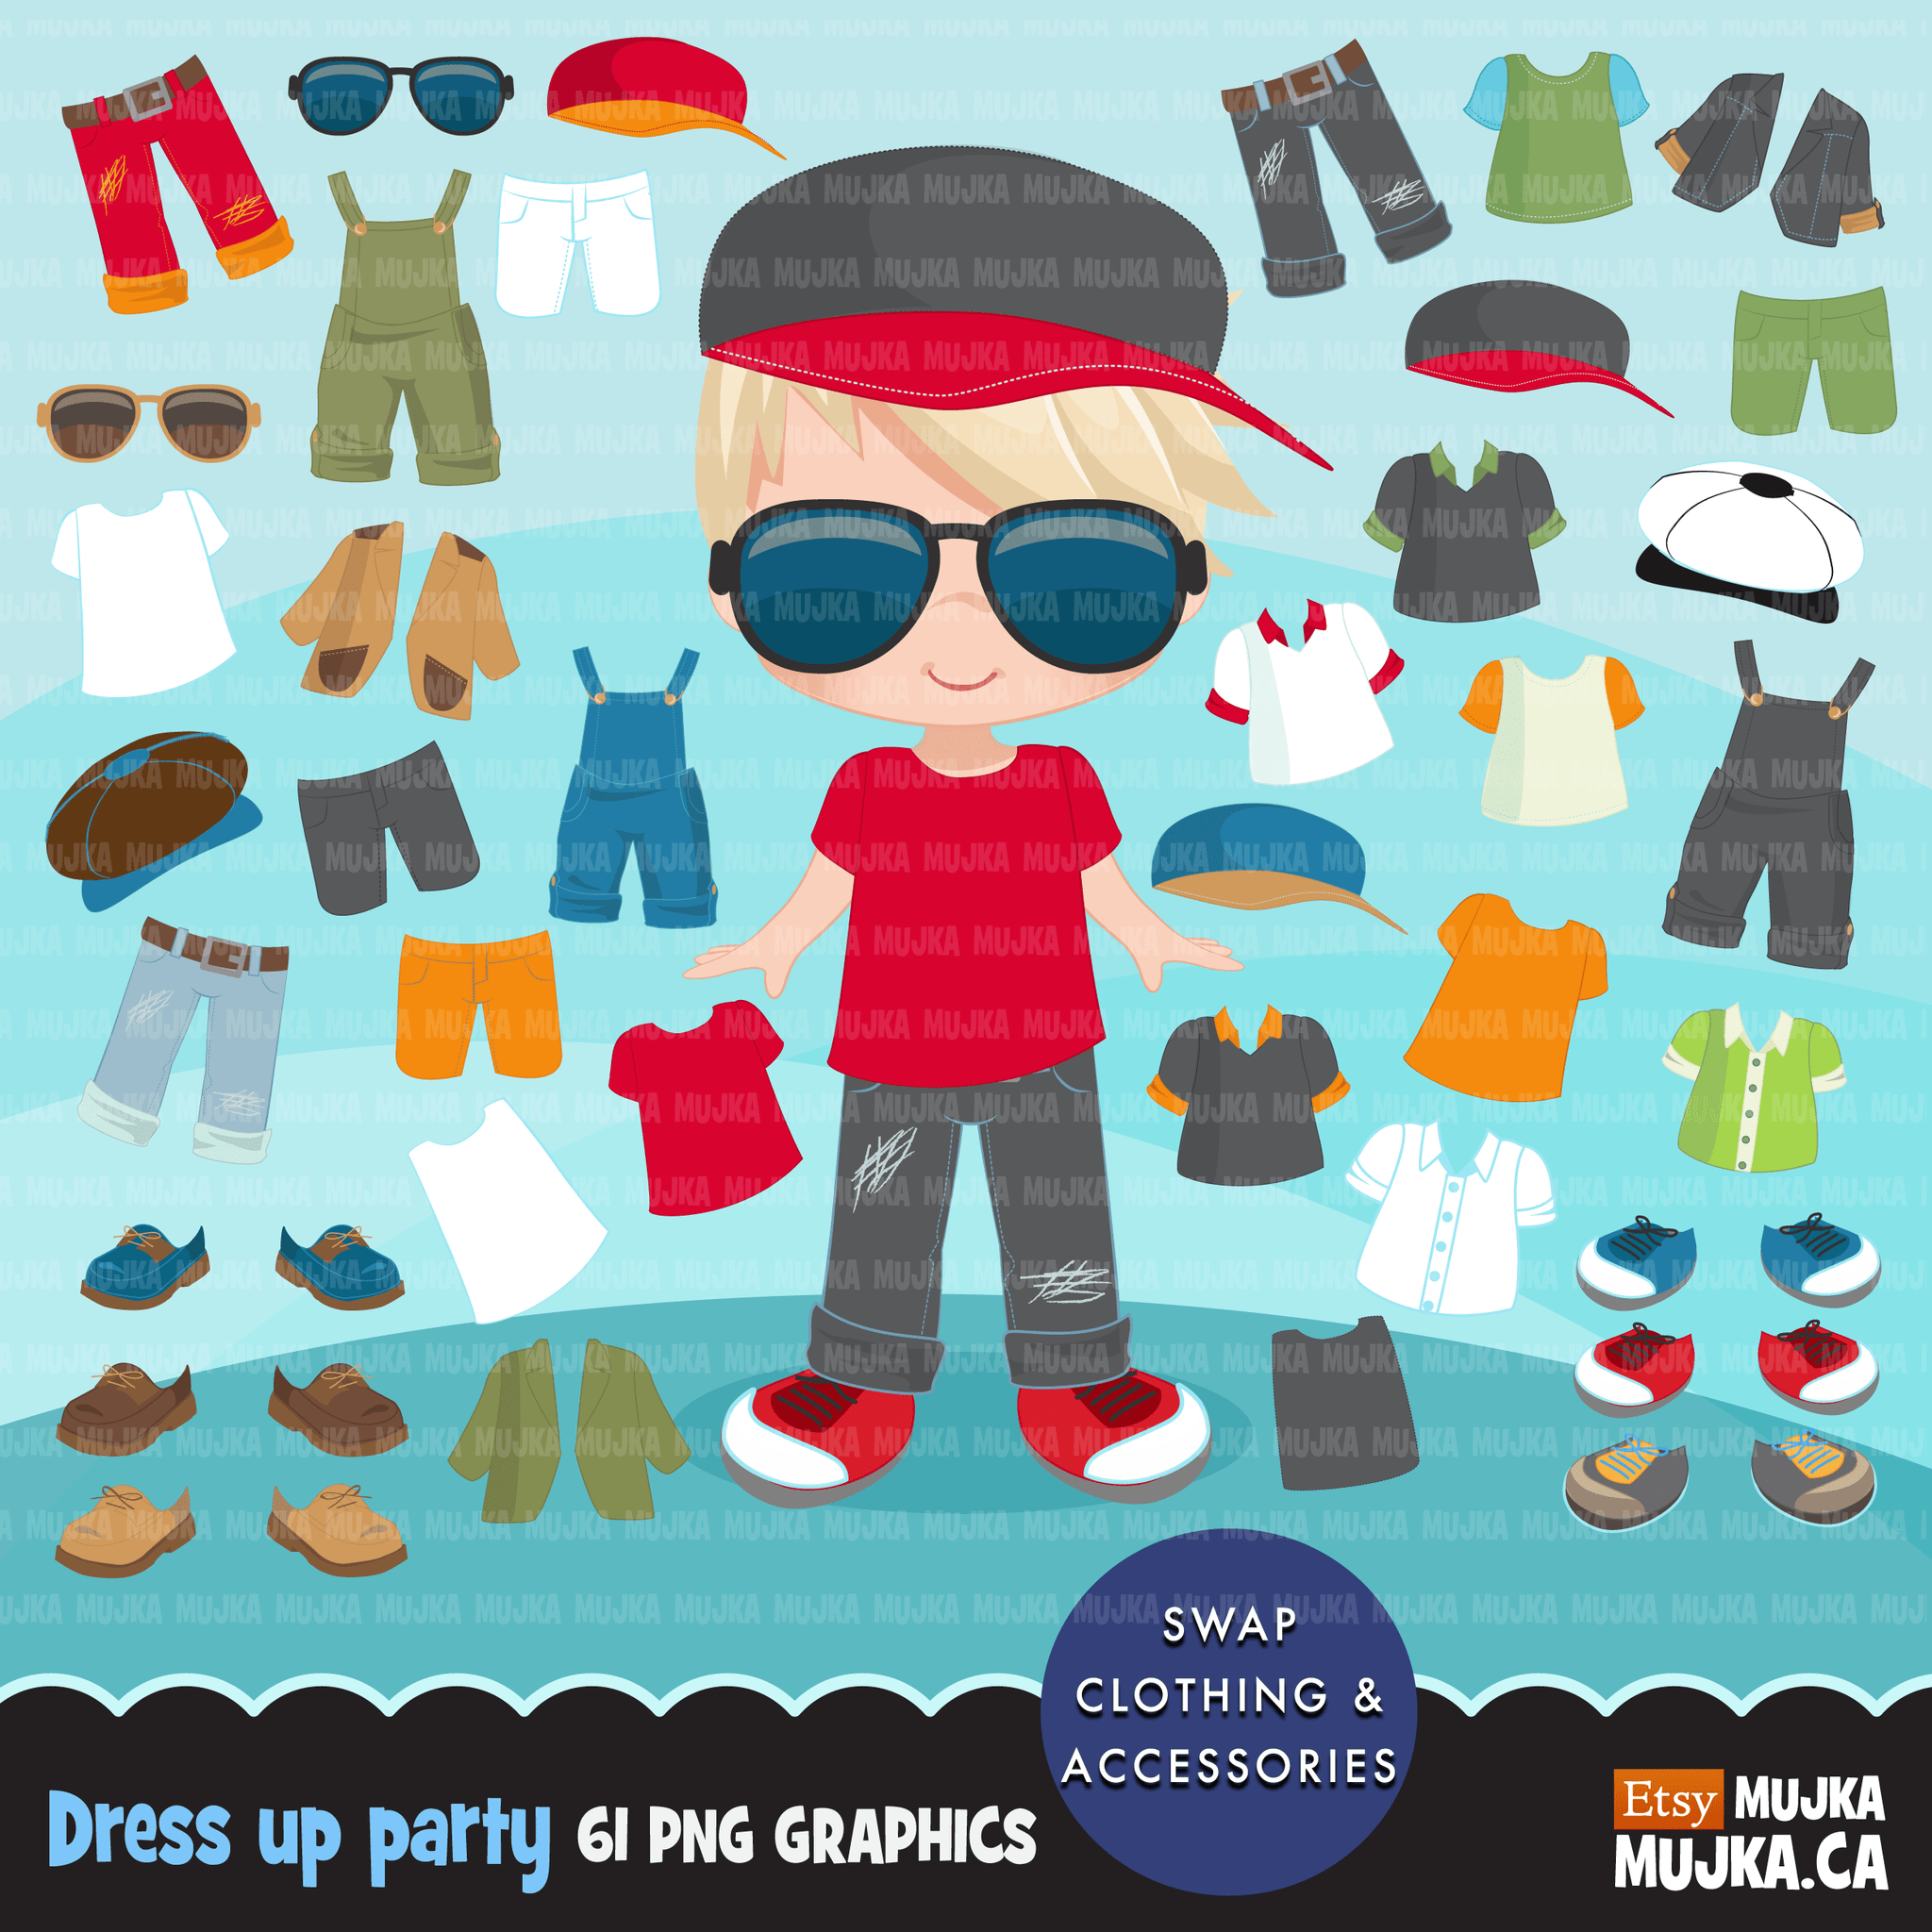 Paper Doll clipart Bundle, Dress up graphics, fashion outfits for